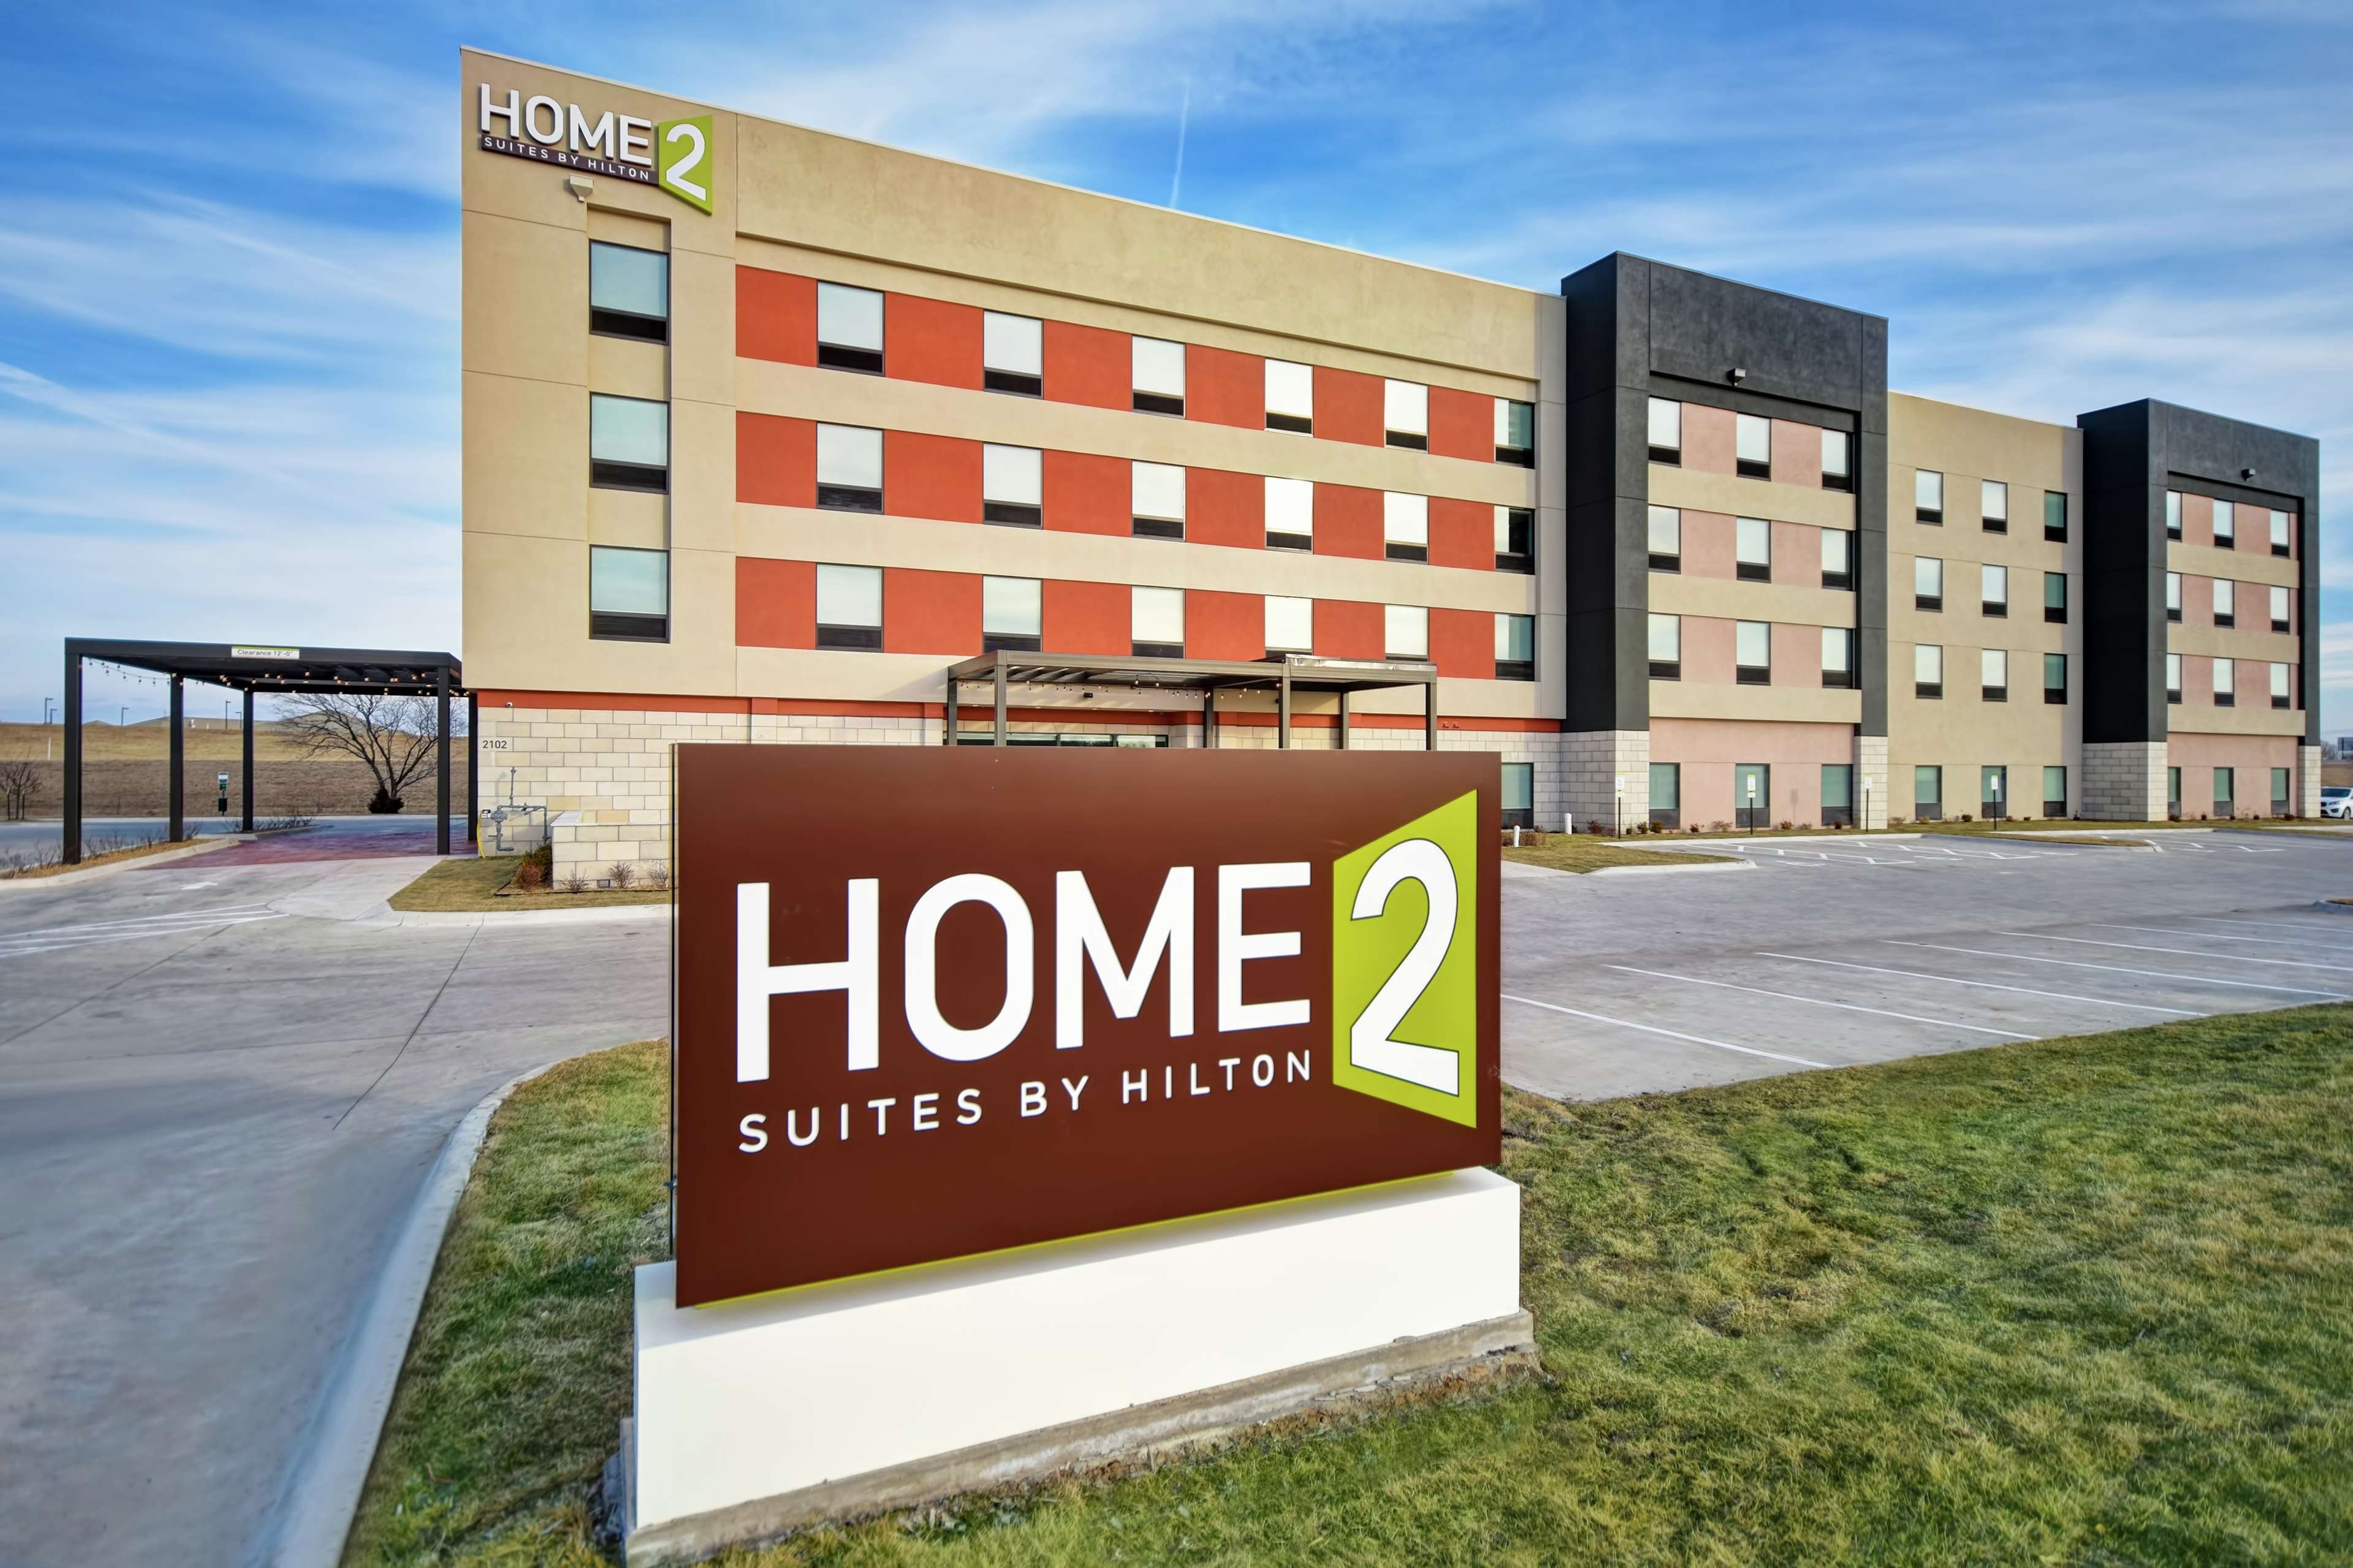 Home2 Suites by Hilton Wichita Northeast image